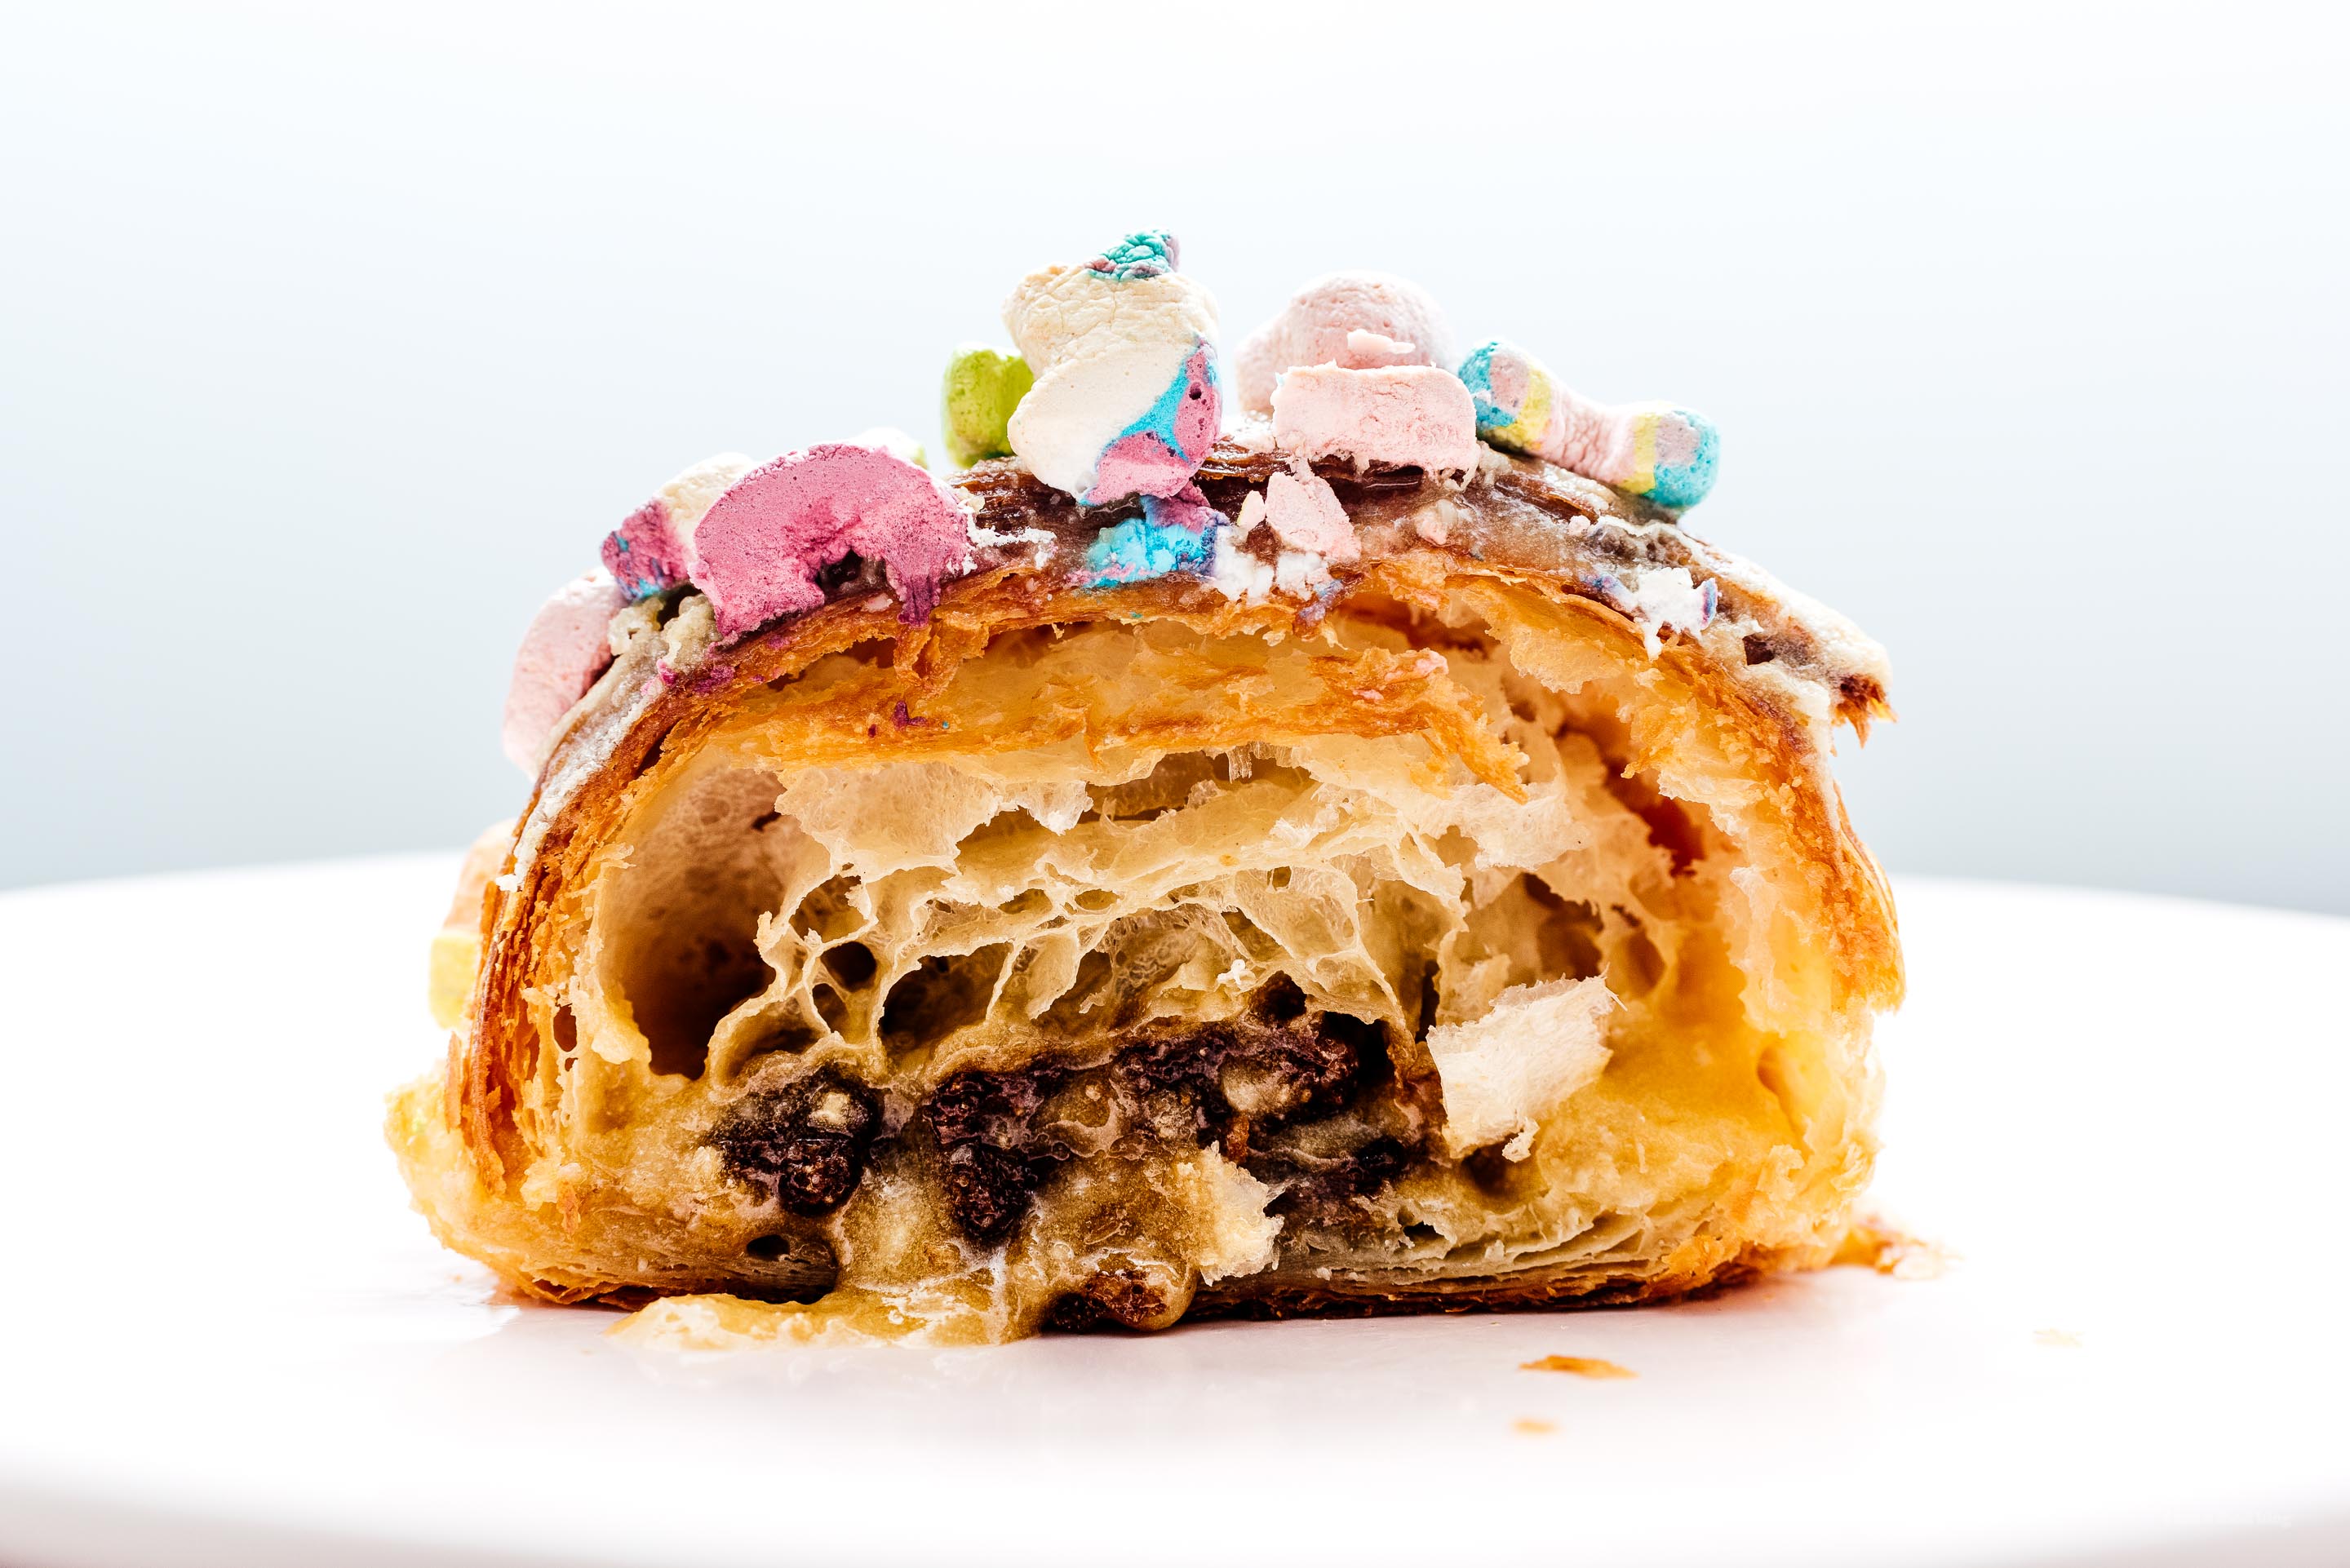 How to Make a Twice Baked Lucky Charms Almond Croissant